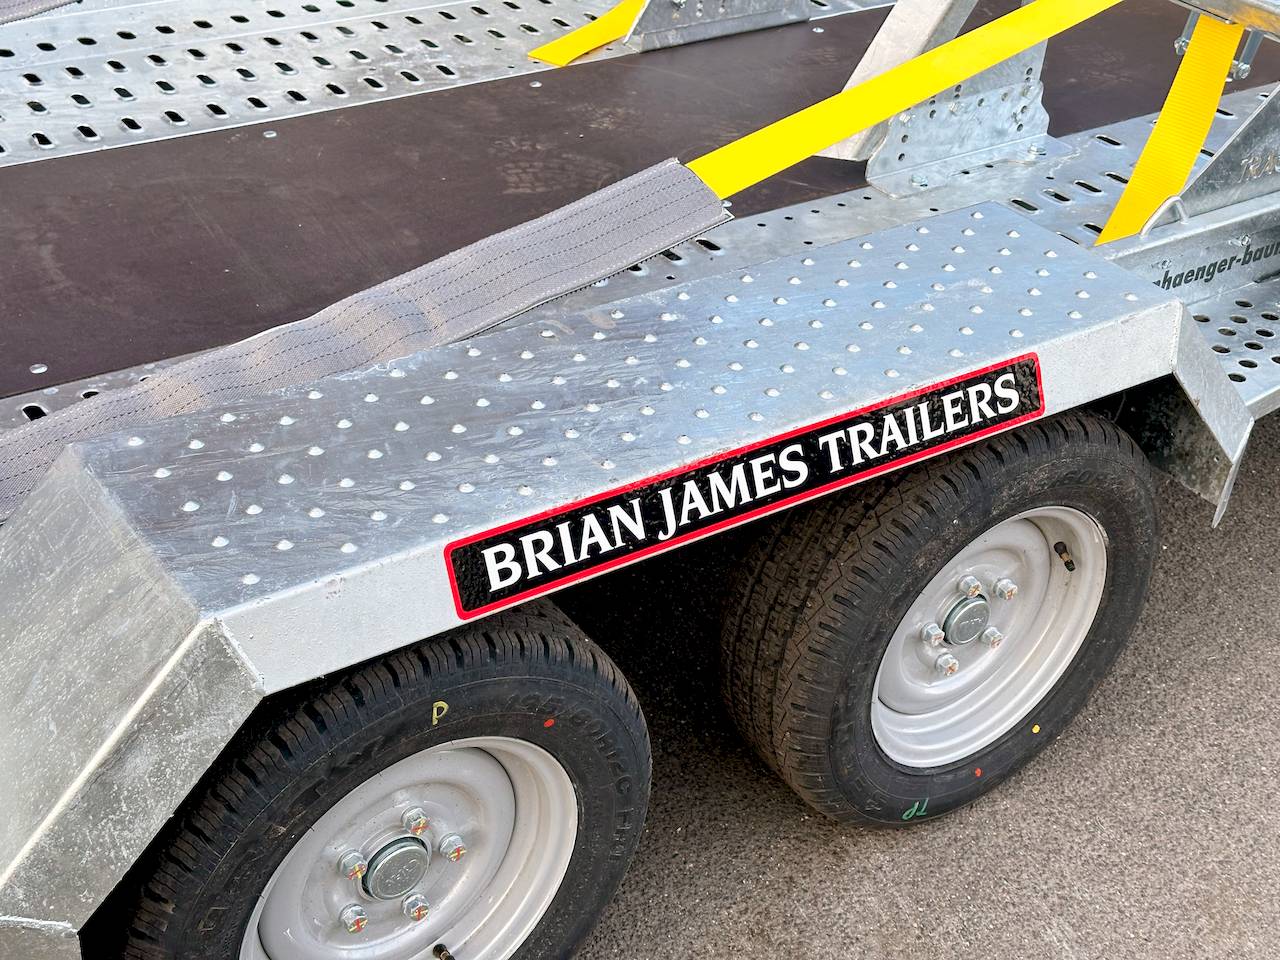 BRIAN JAMES CARGO DIGGER PLANT 2 | TRACSTRAP | EINZELRAMPEN